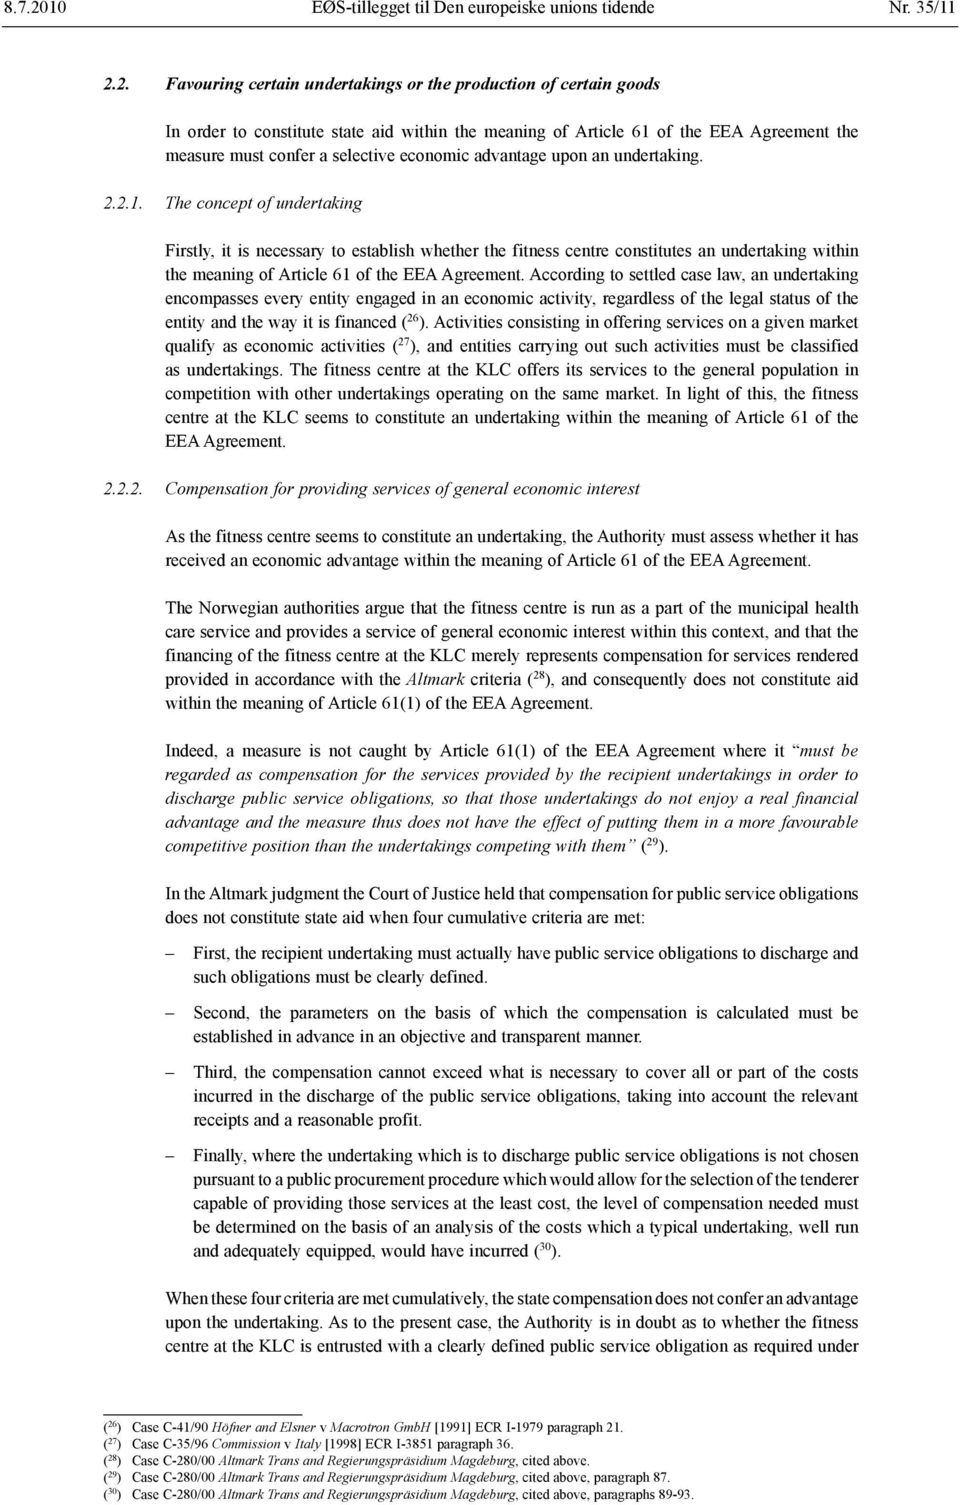 2. Favouring certain undertakings or the production of certain goods In order to constitute state aid within the meaning of Article 61 of the EEA Agreement the measure must confer a selective